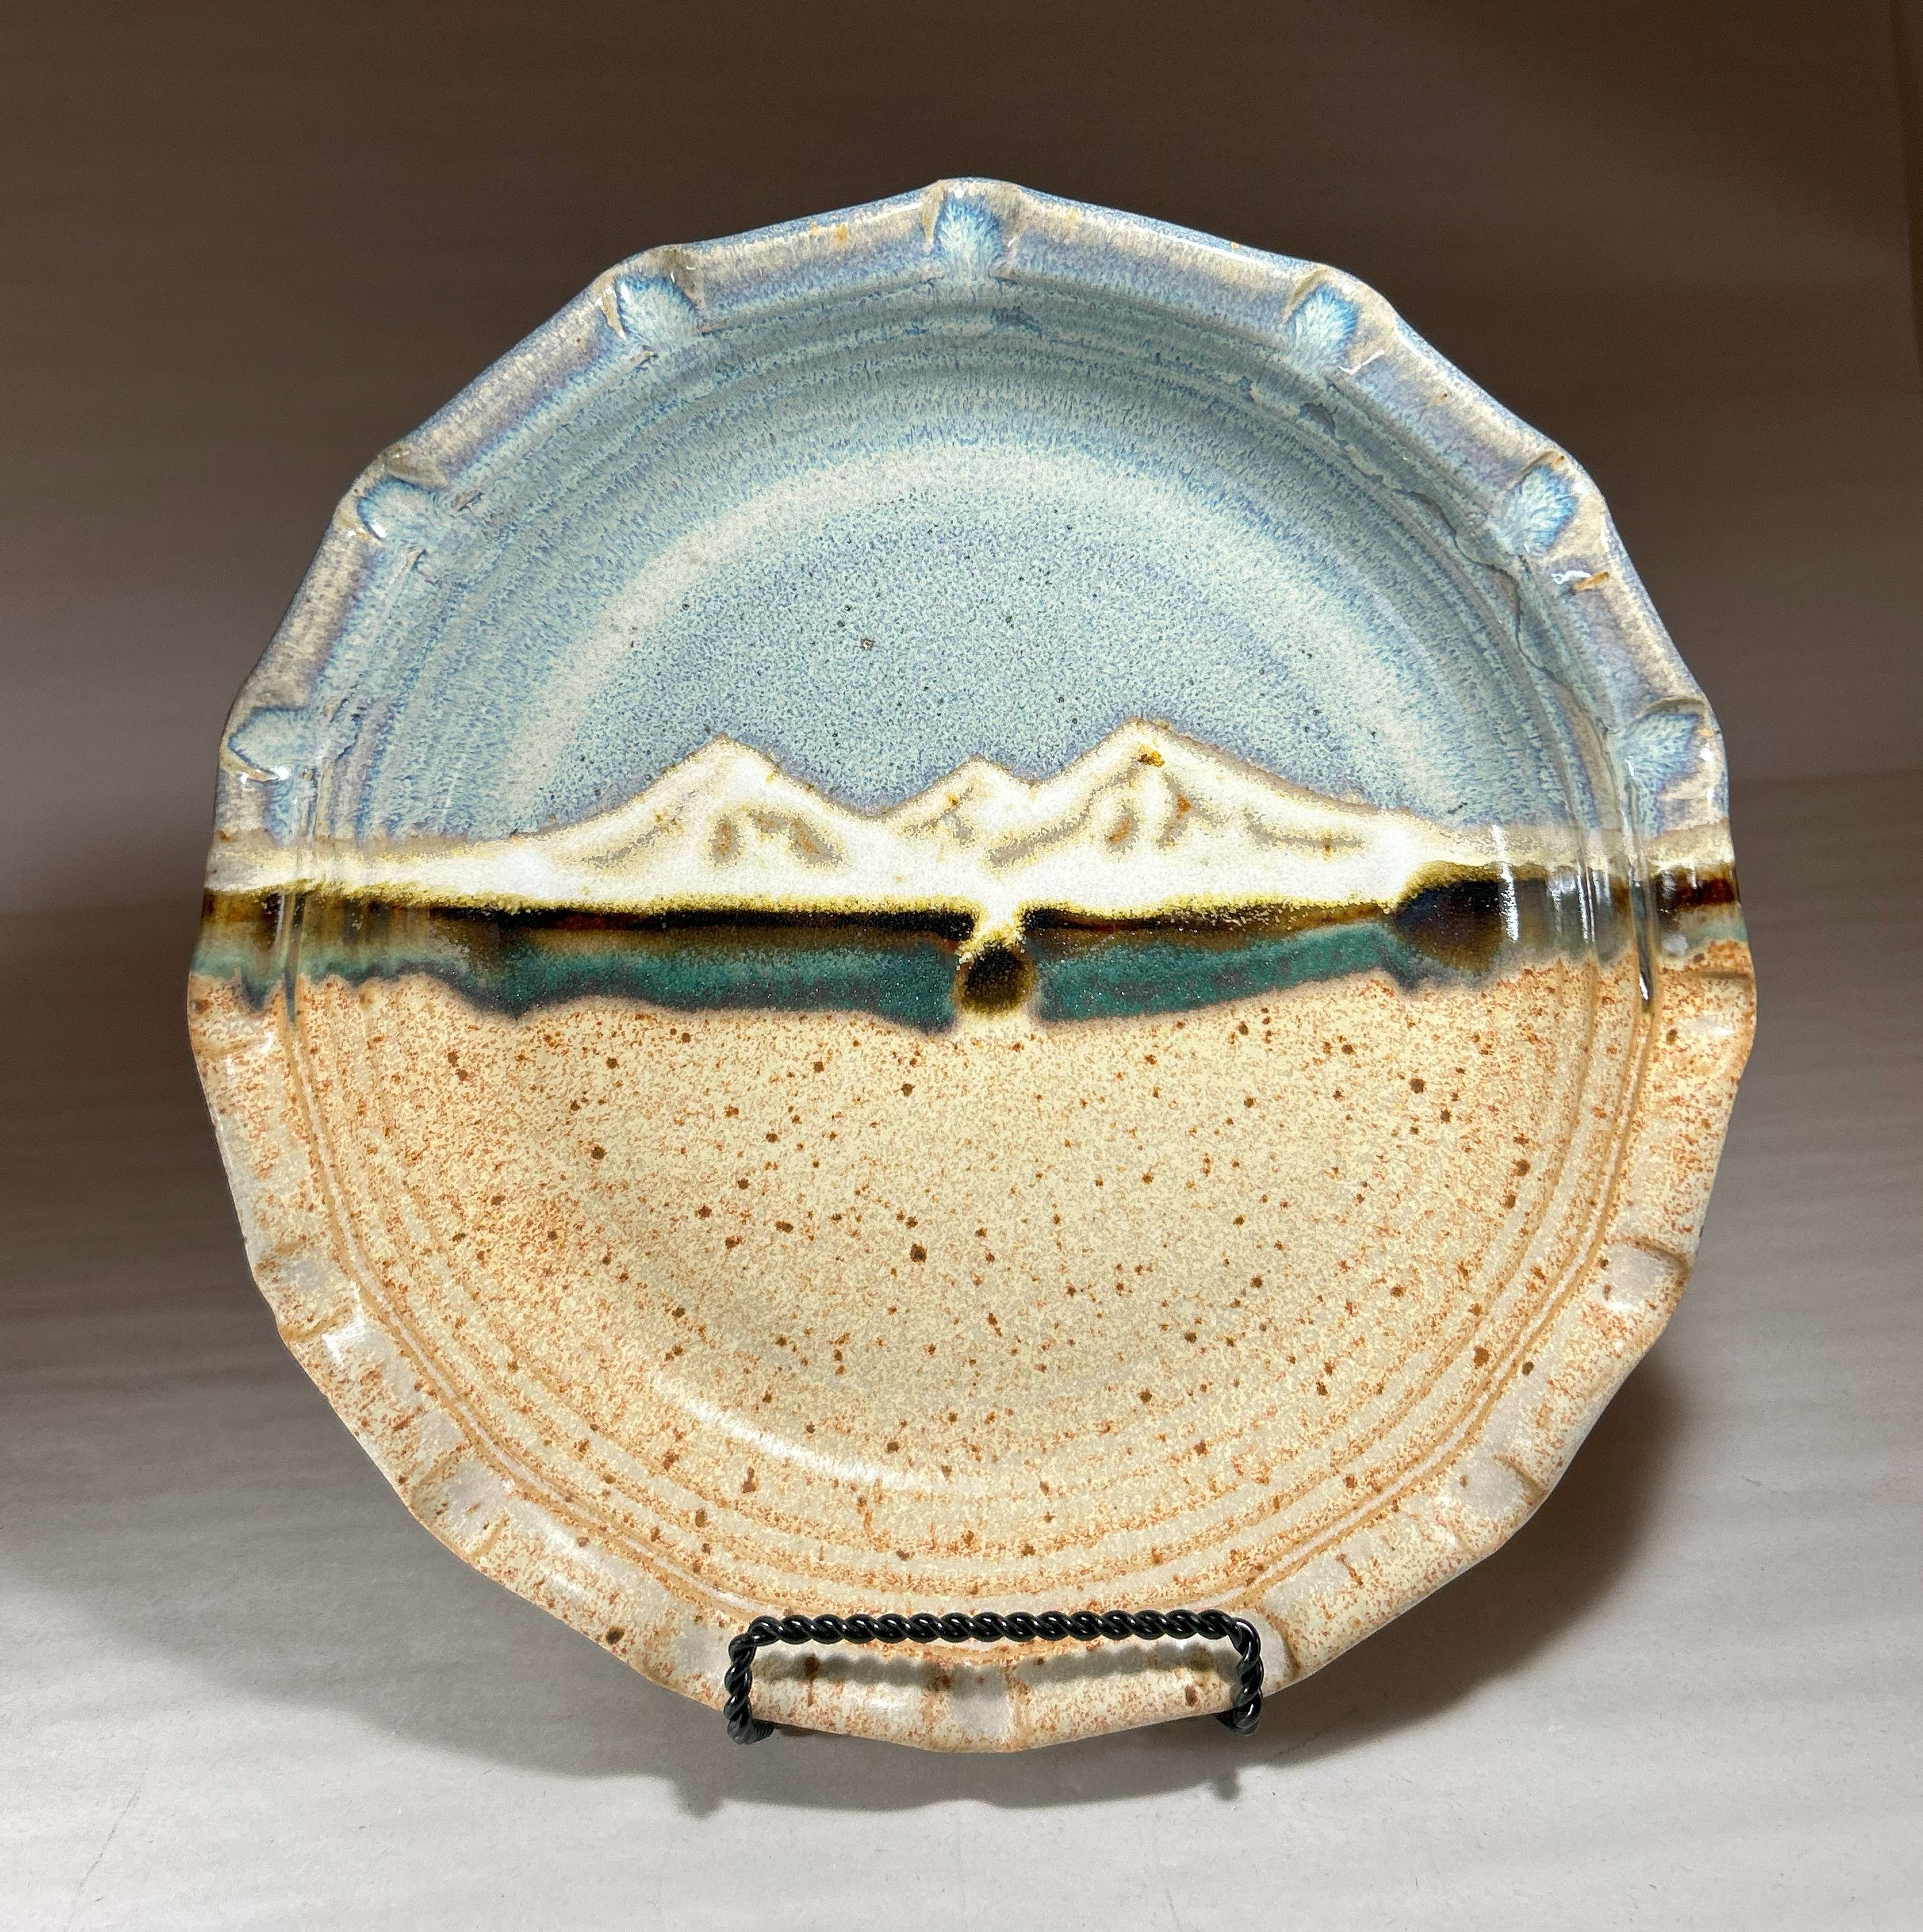 Stoneware Pie Plate Deep dish with fluted edge. – Canyon Creek Pottery